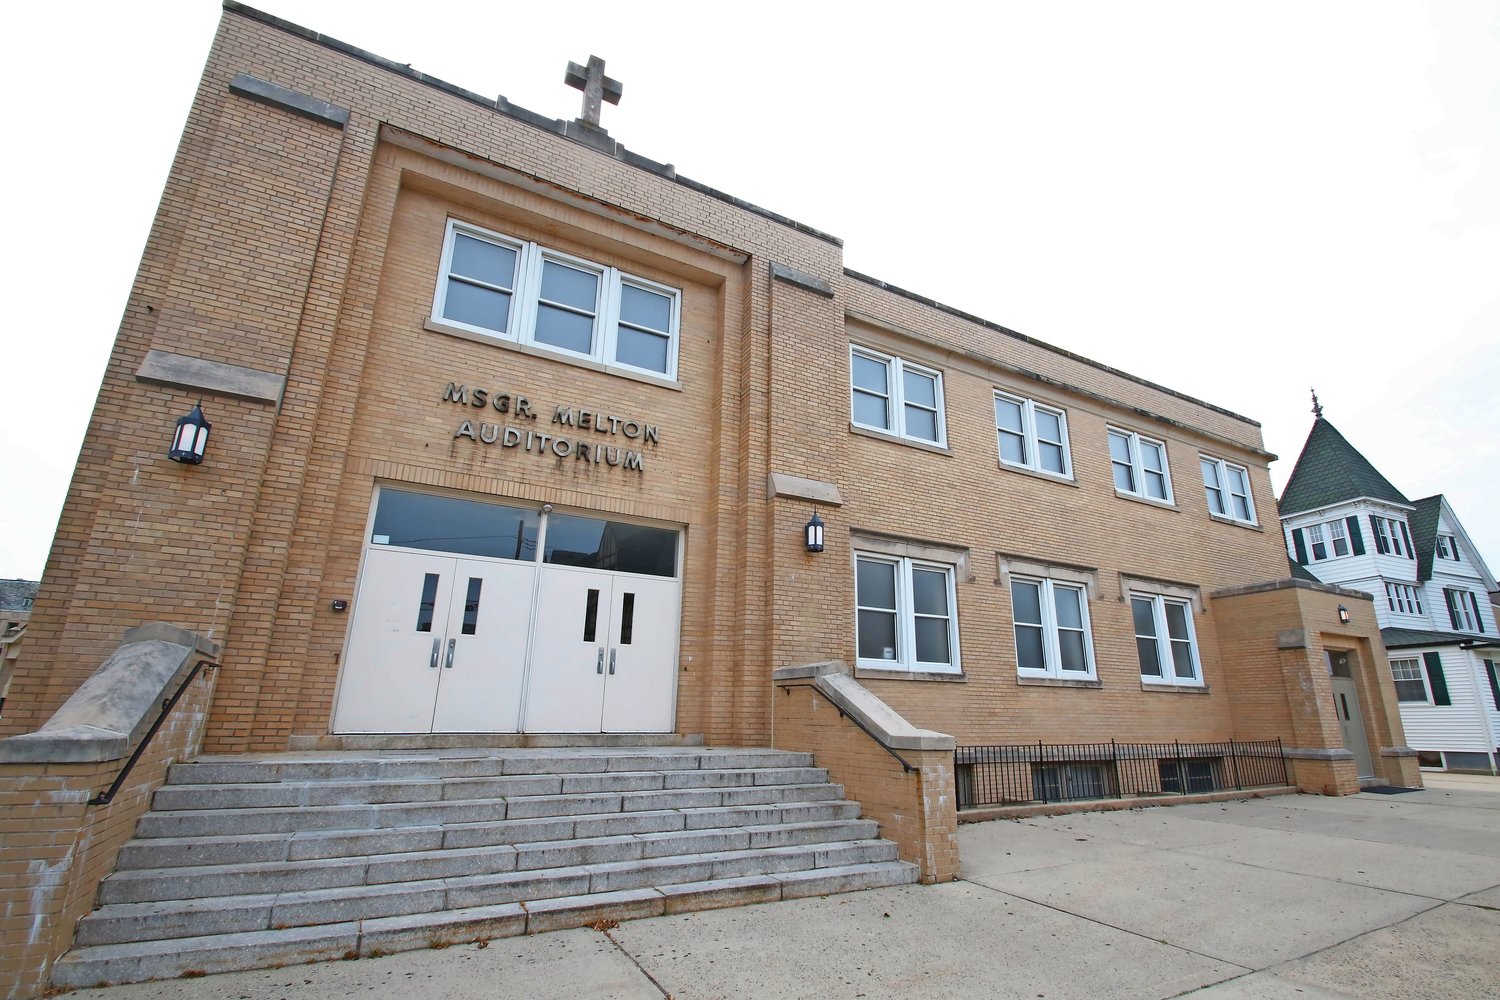 The auditorium at St. Agnes is named after the late Melton, who was one of three clergy accused of sexual abuse last week.